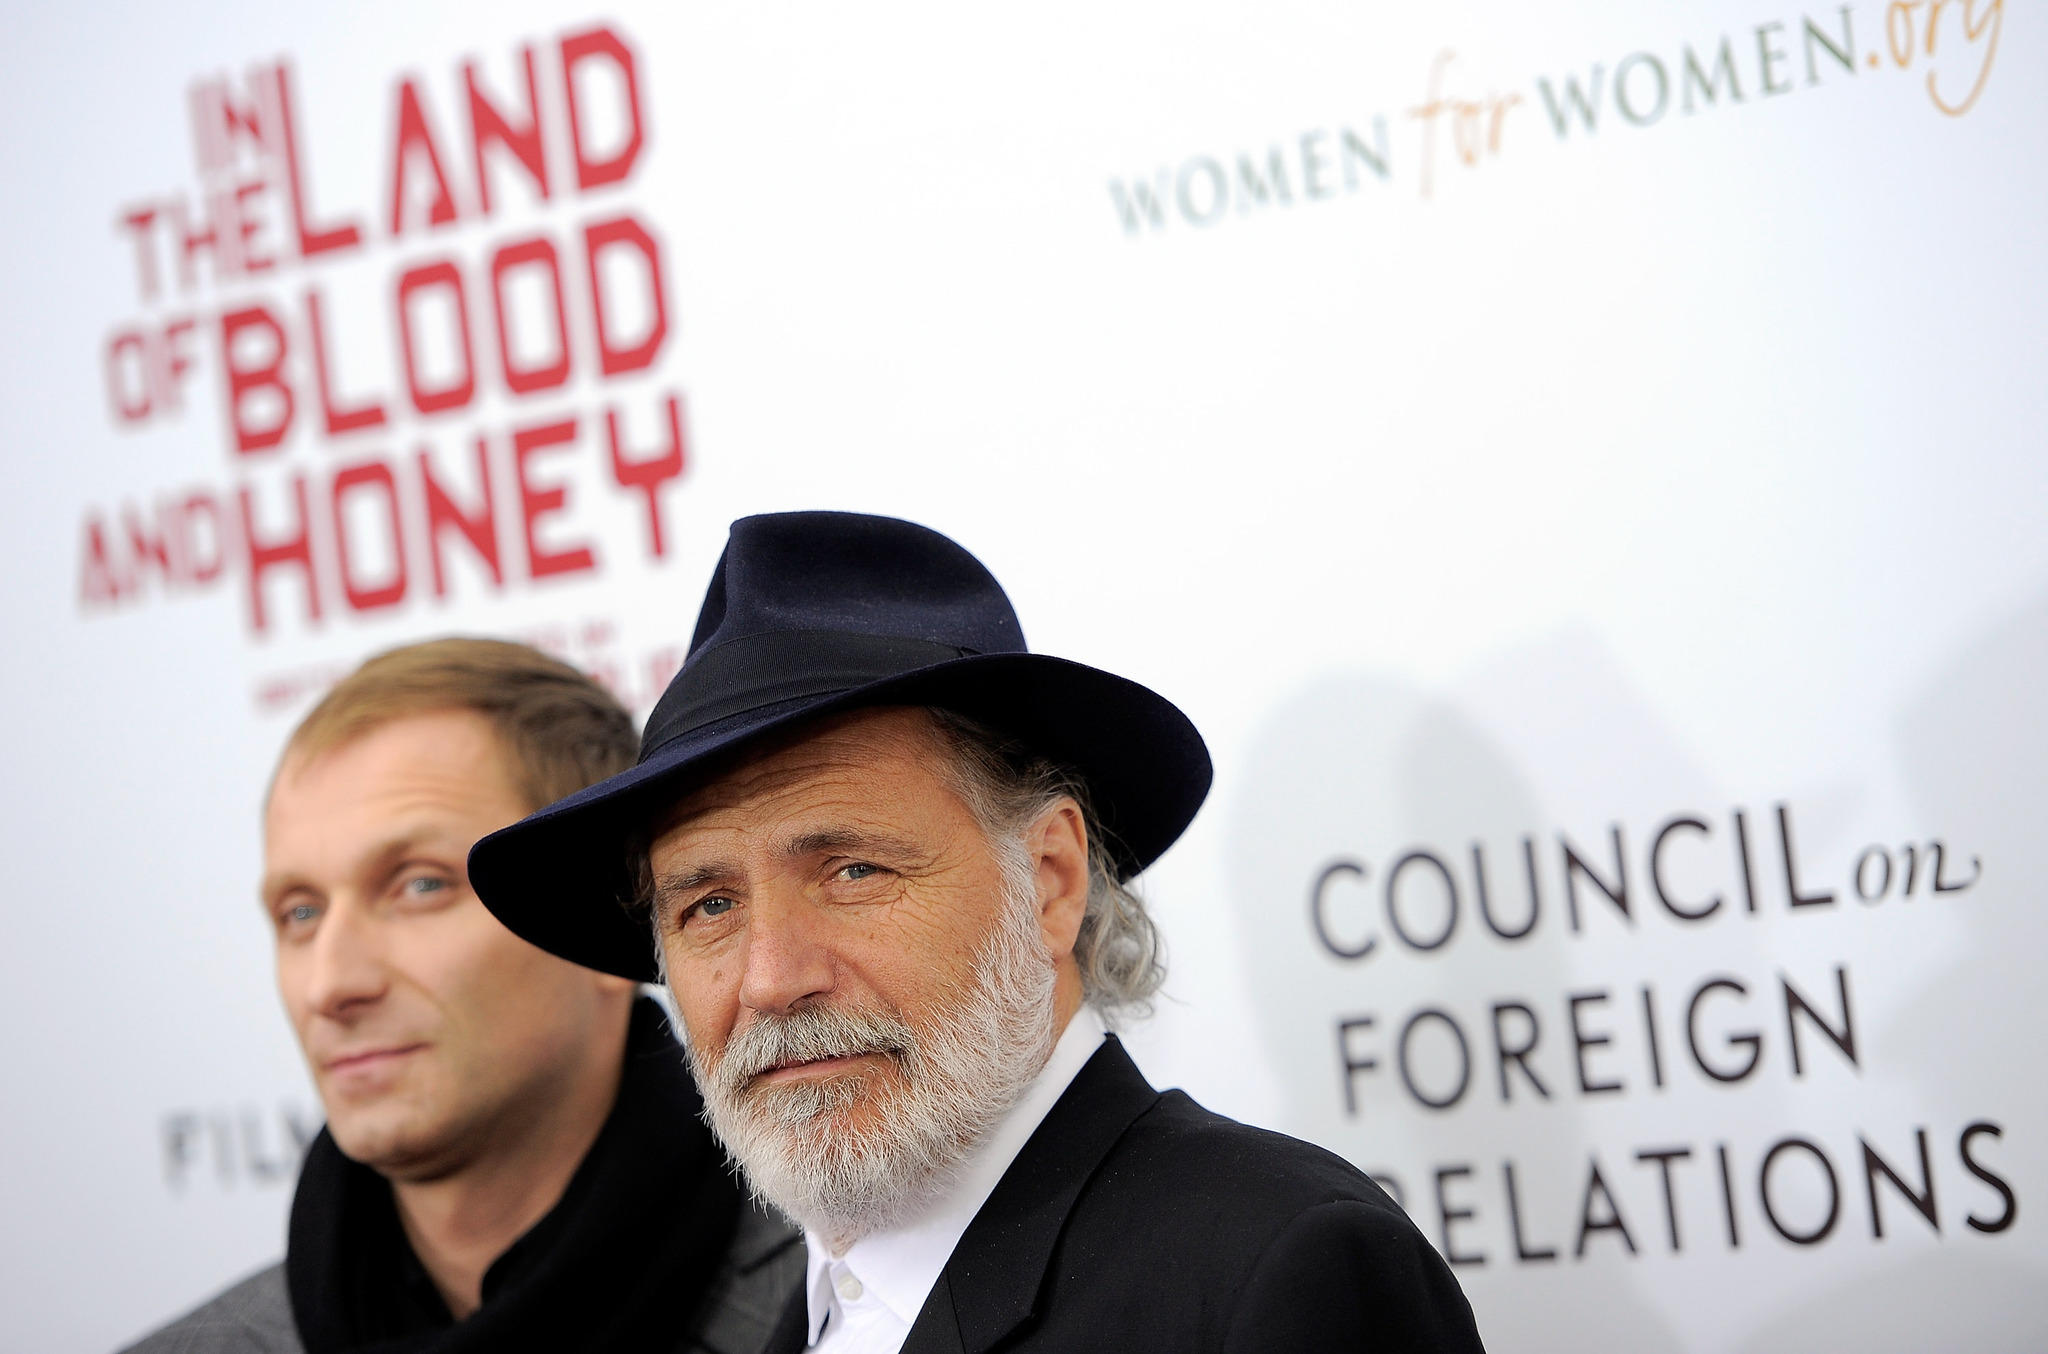 Rade Serbedzija and Goran Kostic at event of In the Land of Blood and Honey (2011)